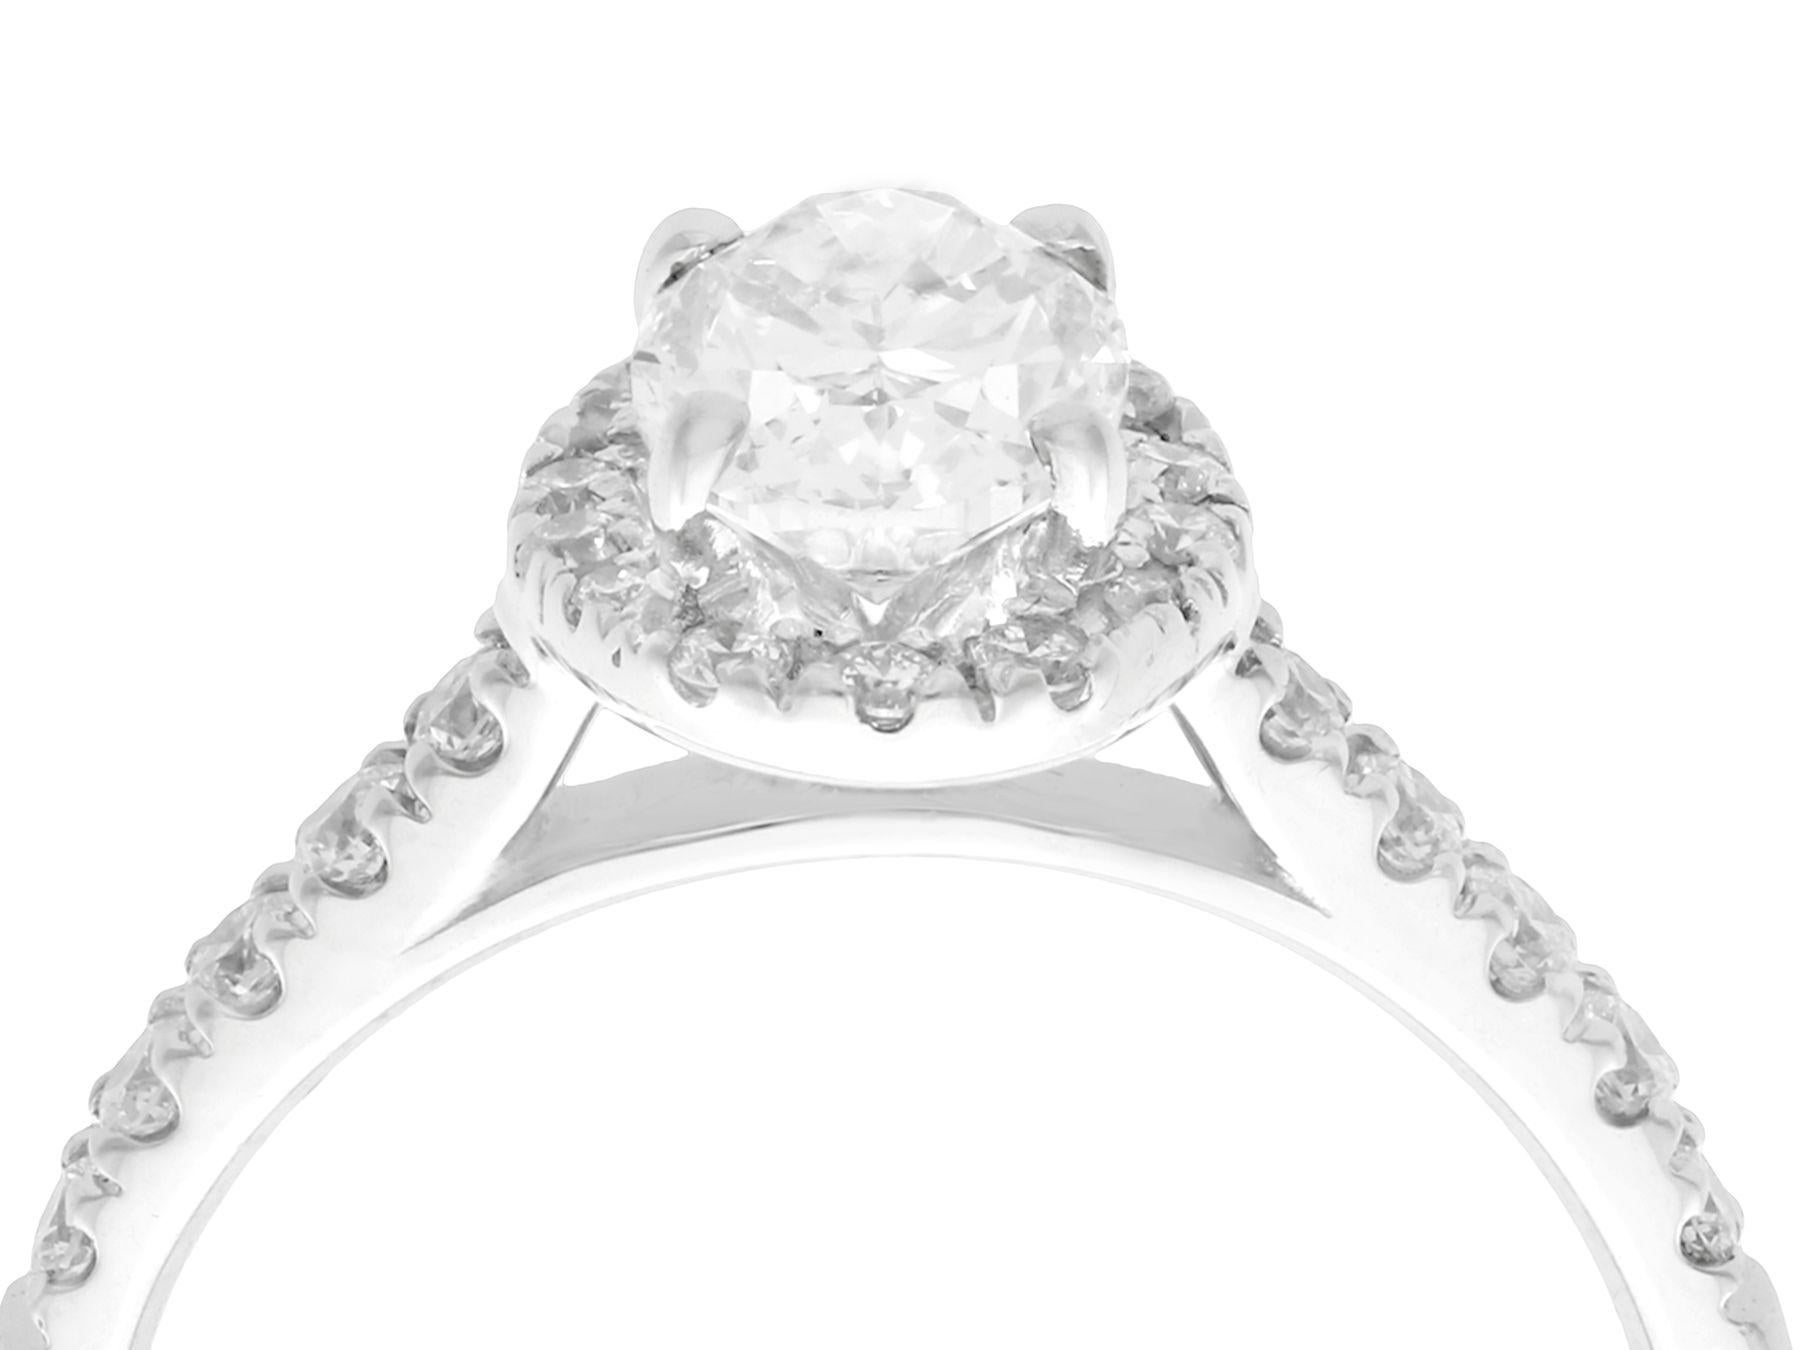 A stunning, fine and impressive contemporary 1.42 carat diamond and 18 karat white gold halo ring; part of our diverse diamond jewelry and estate jewelry collections.

This stunning, fine and impressive oval cut diamond ring with halo has been